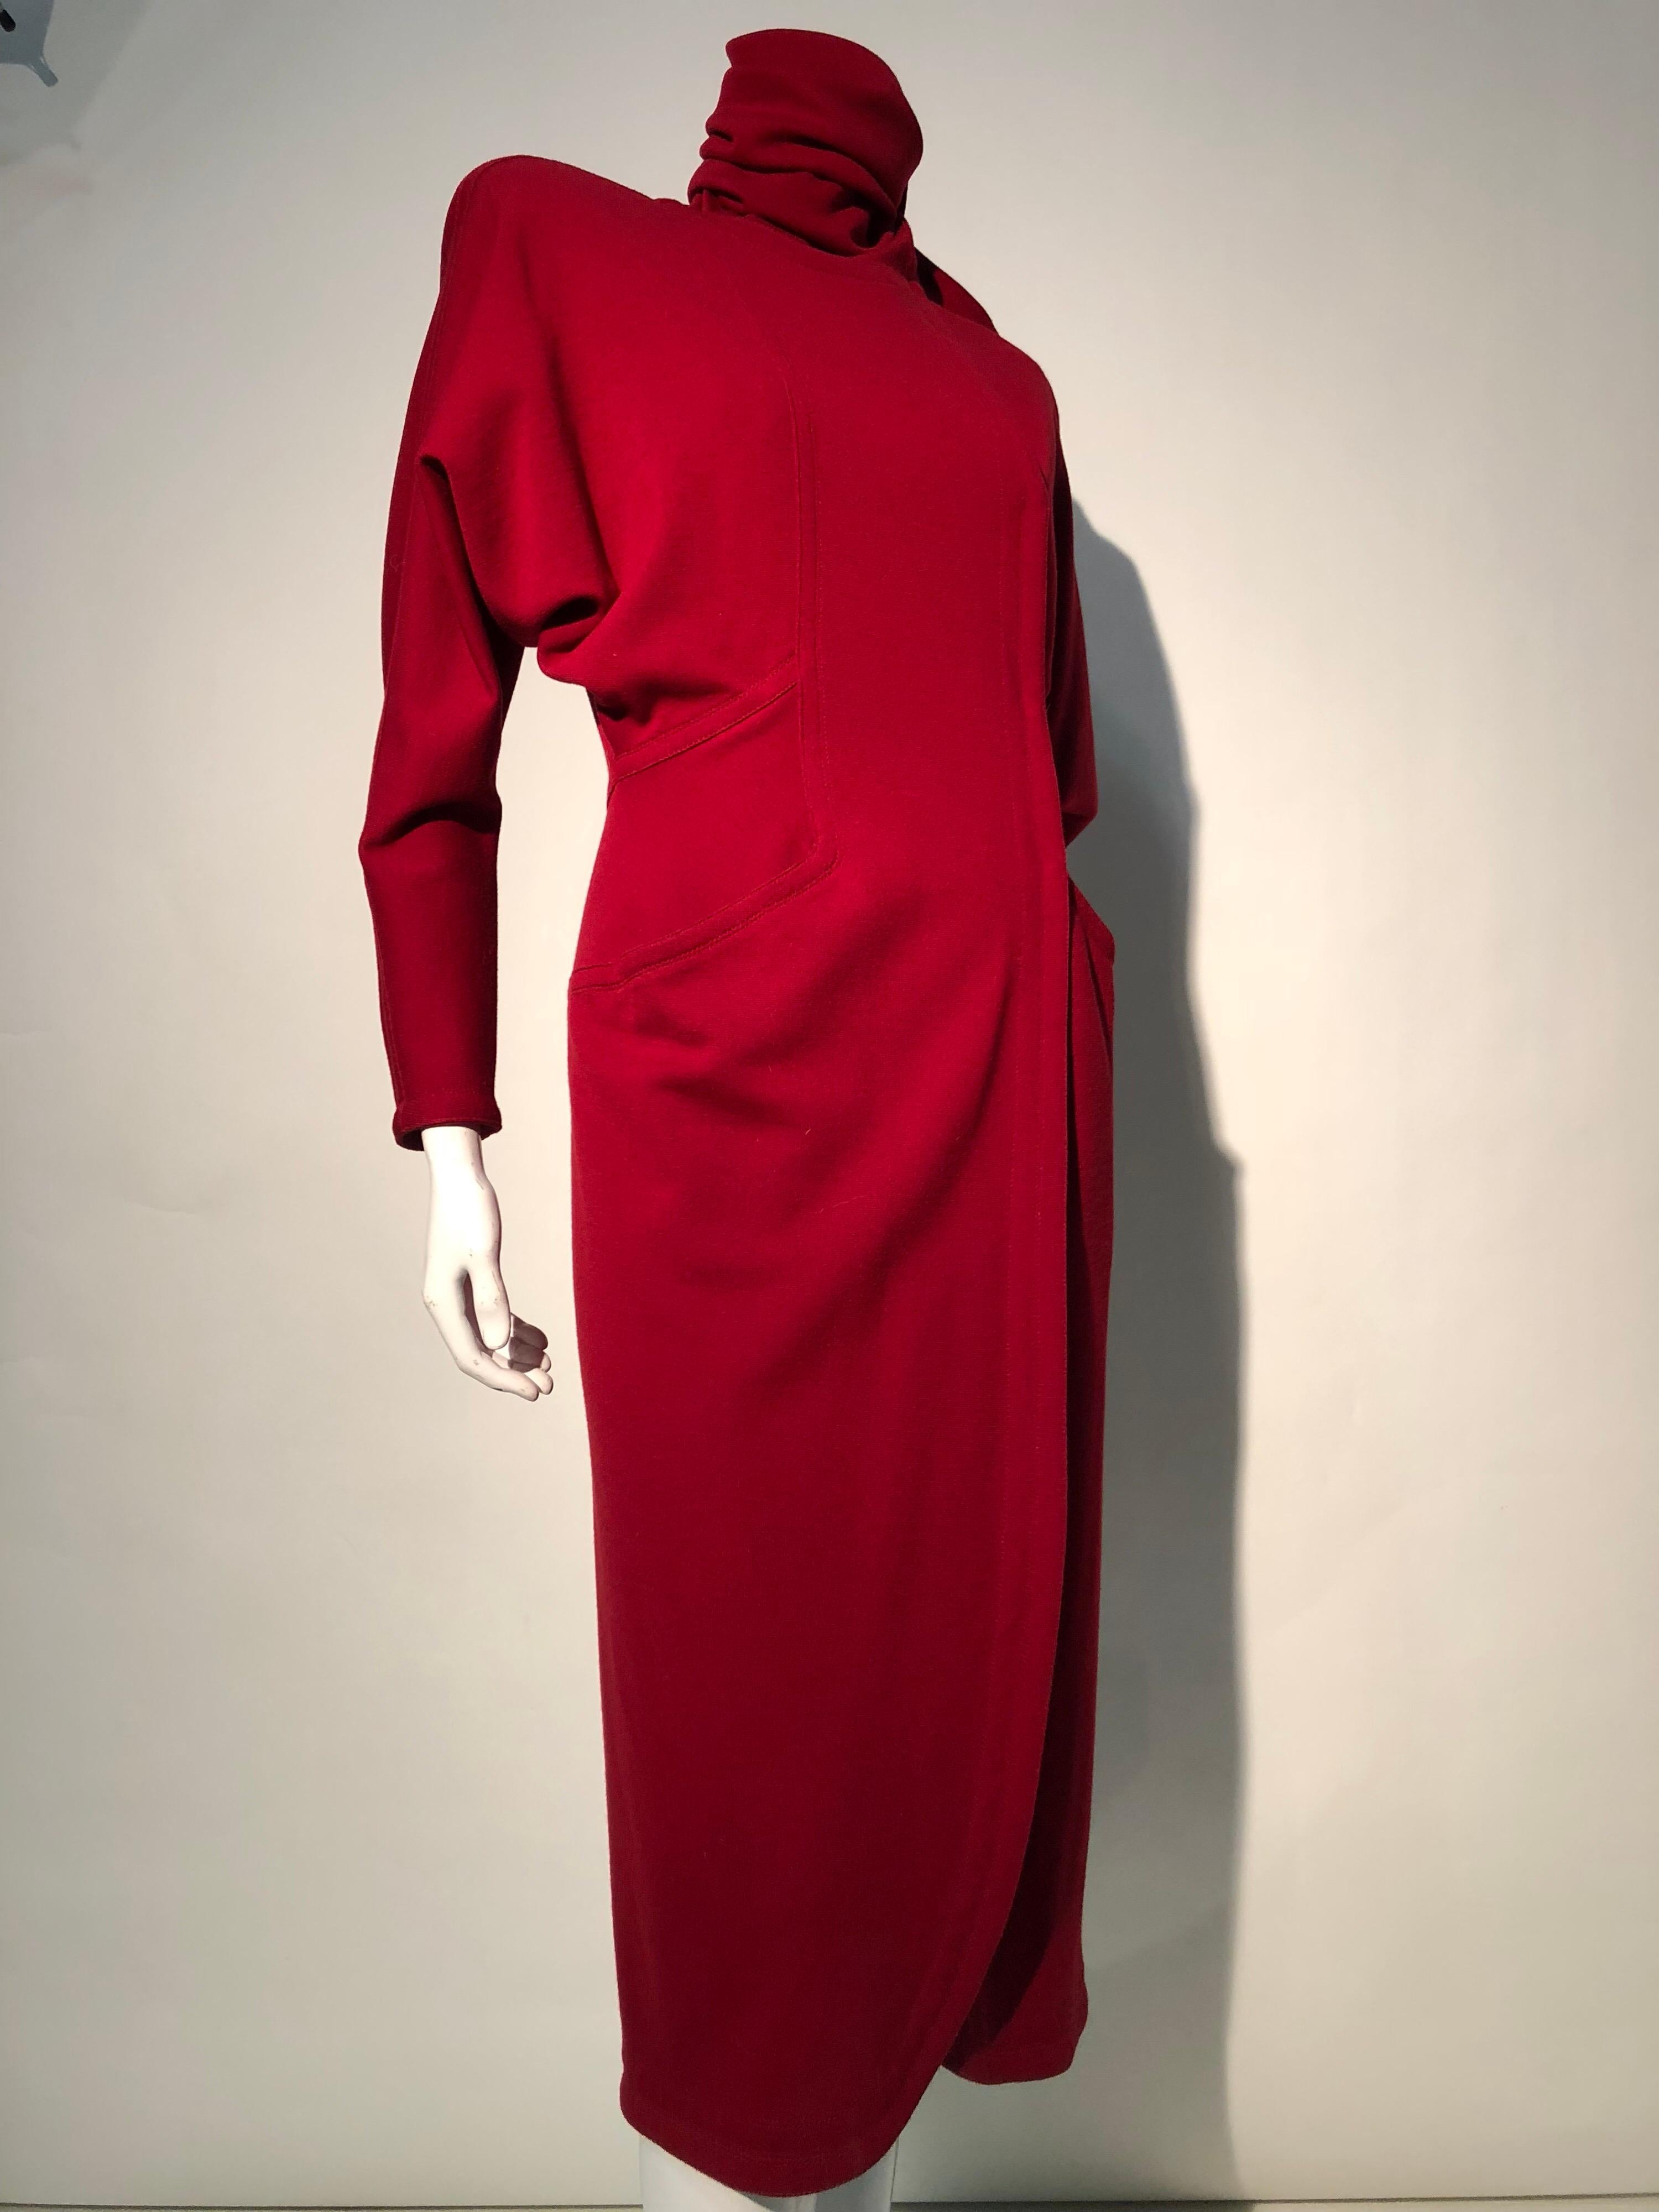 1980s Gianni Versace Vivid Red Wool Wrap-Style Coat Dress W/ Attached Foulard In Excellent Condition For Sale In Gresham, OR